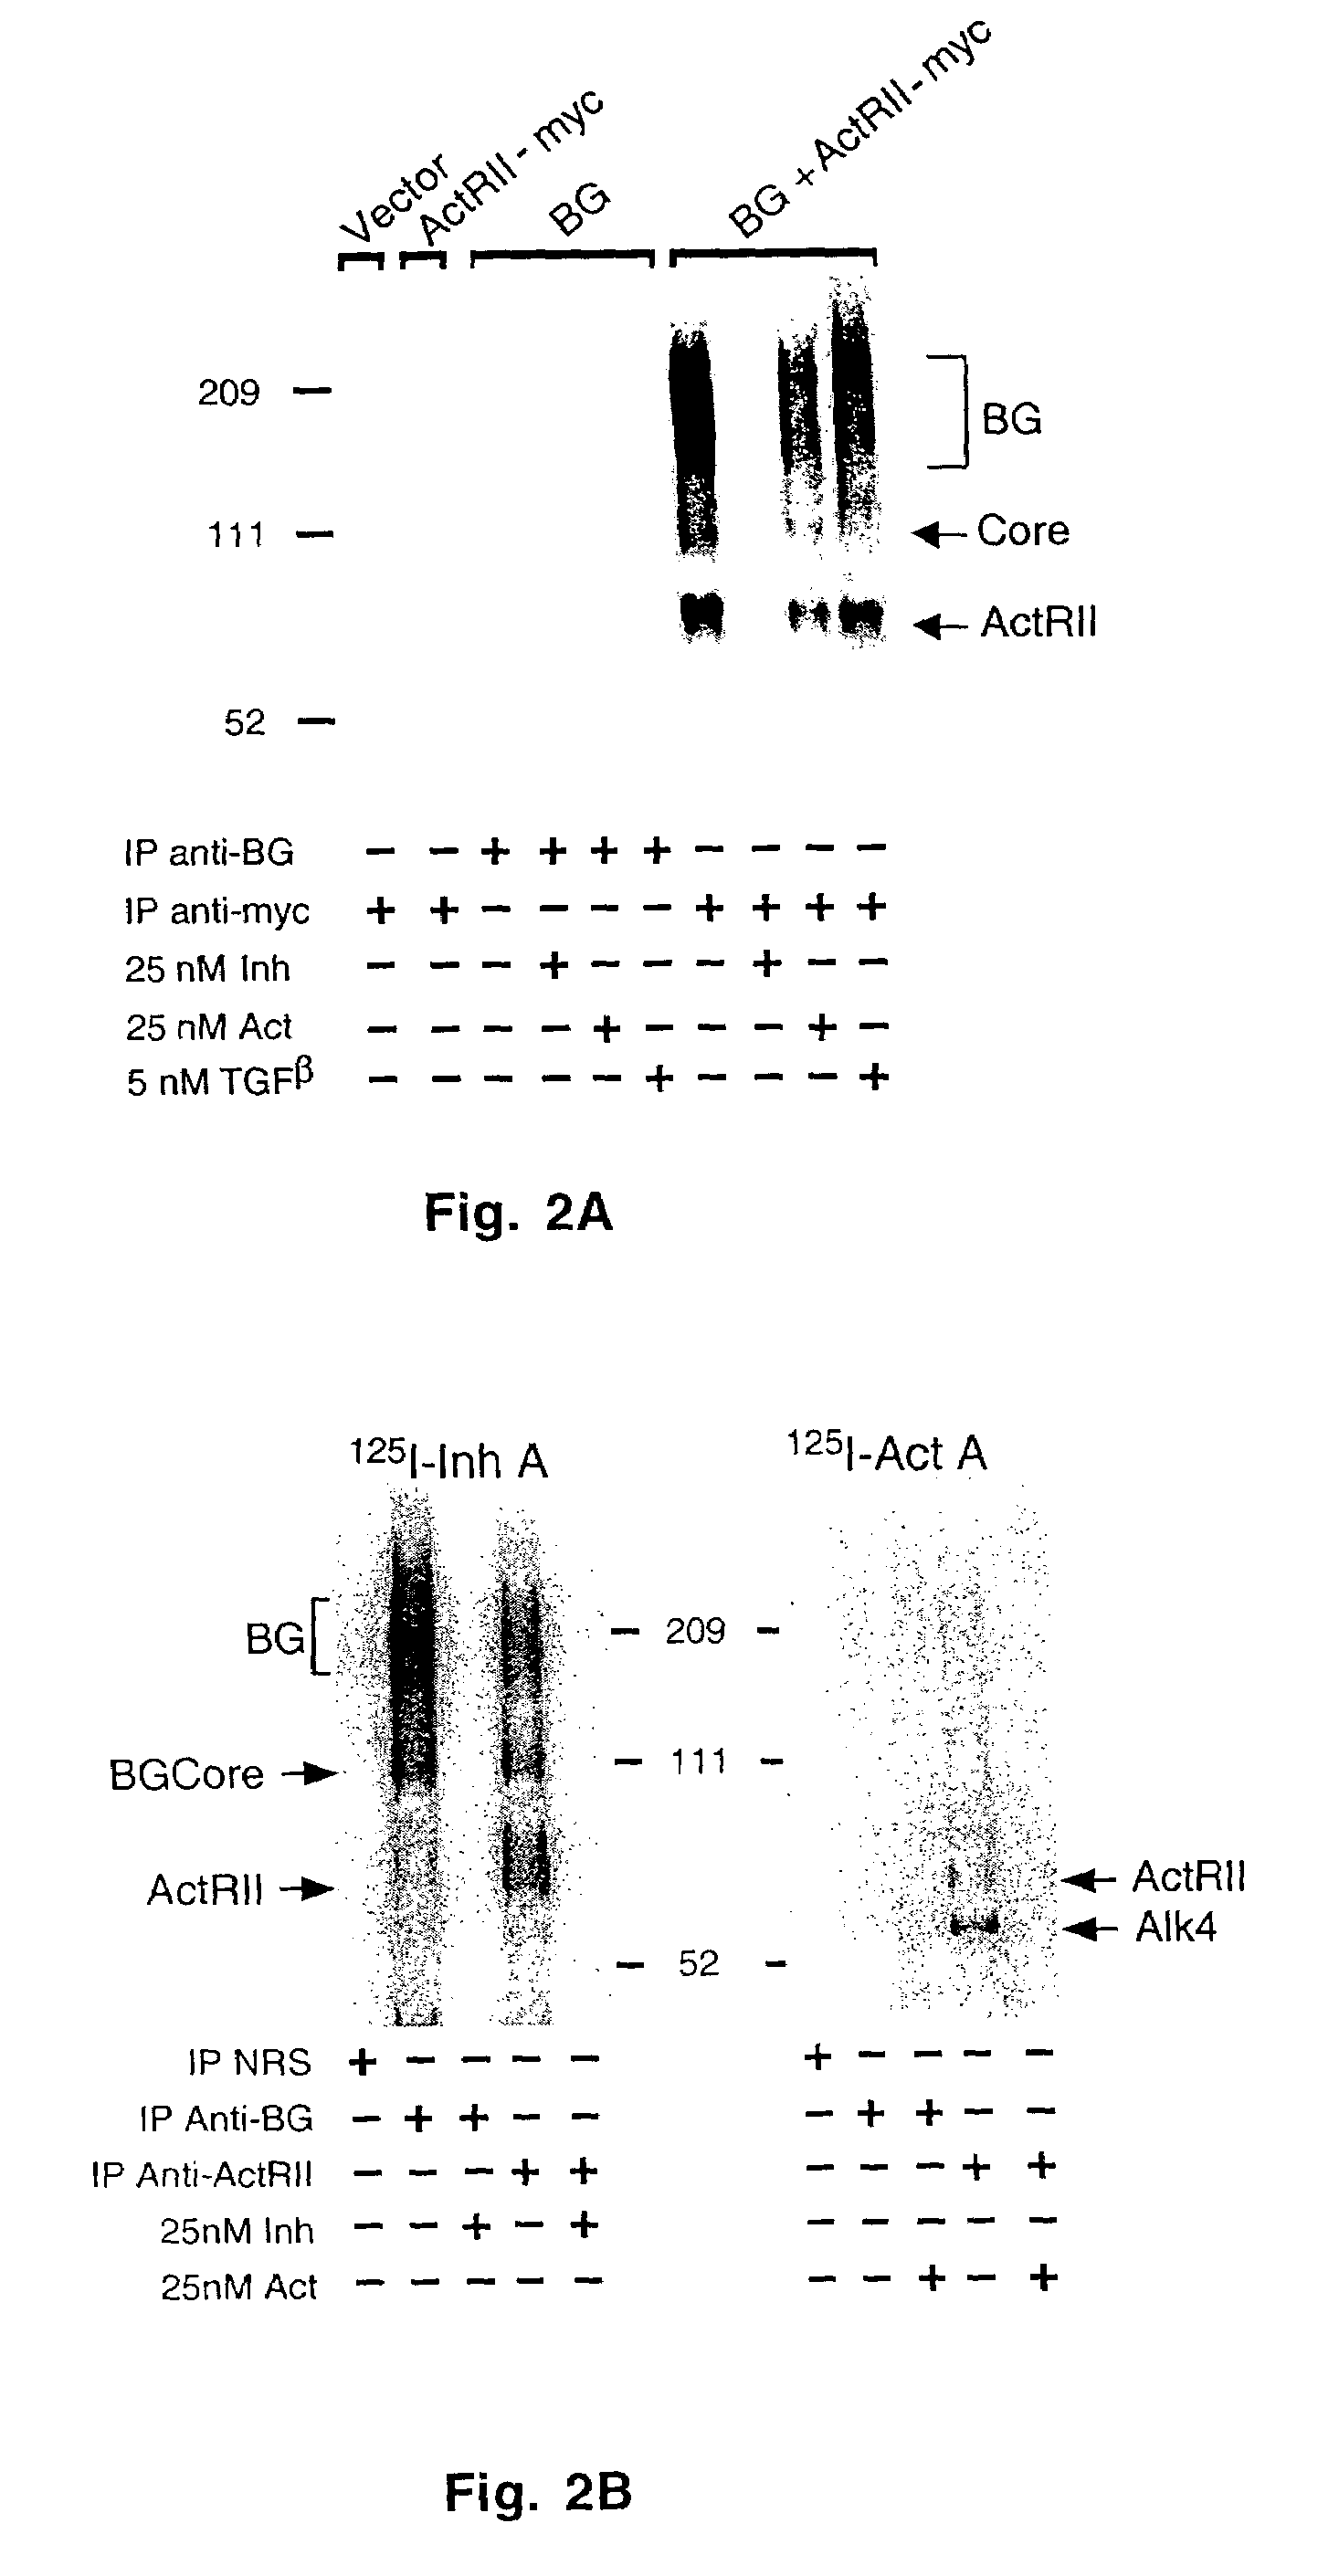 Method of inhibiting the formation of inhibin/betaglycan complexes with an anti-betaglycan antibody